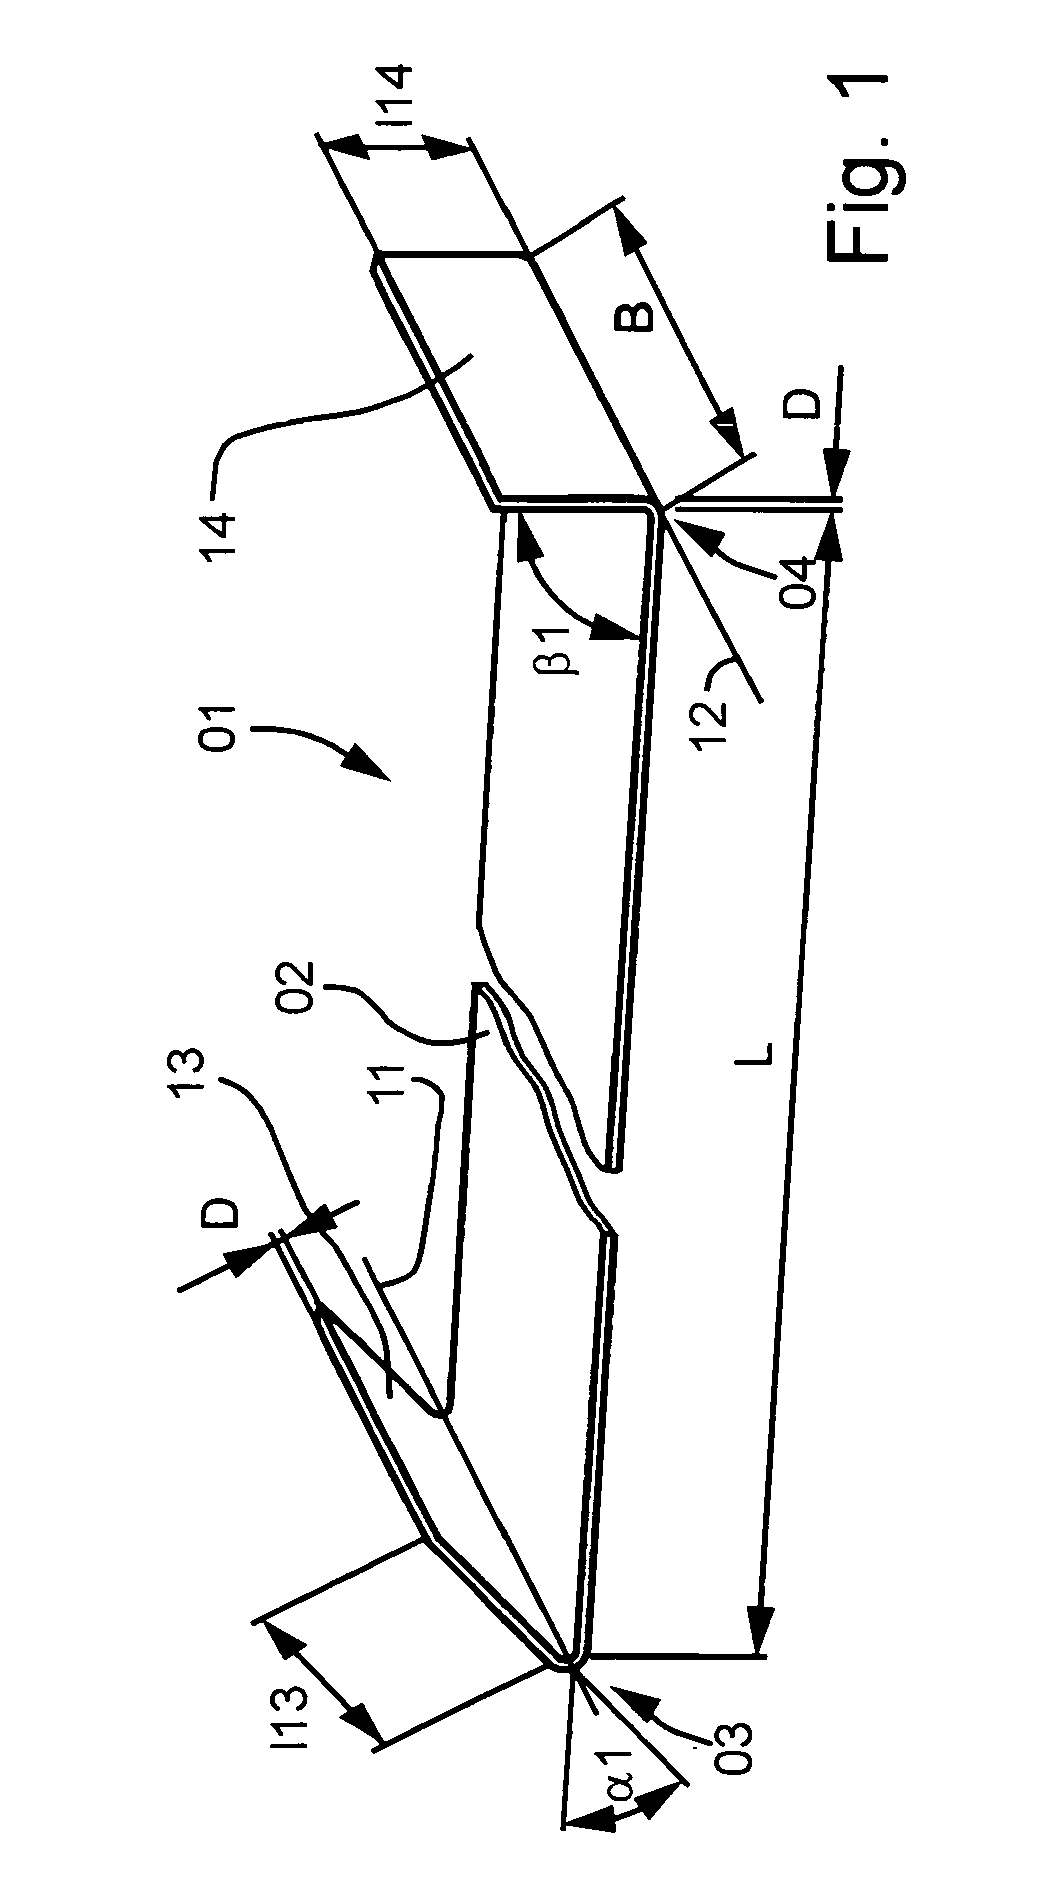 Systems for checking the loading of a print forme magazine and systems for transporting at least one print forme stored in a print forme magazine to a cylinder